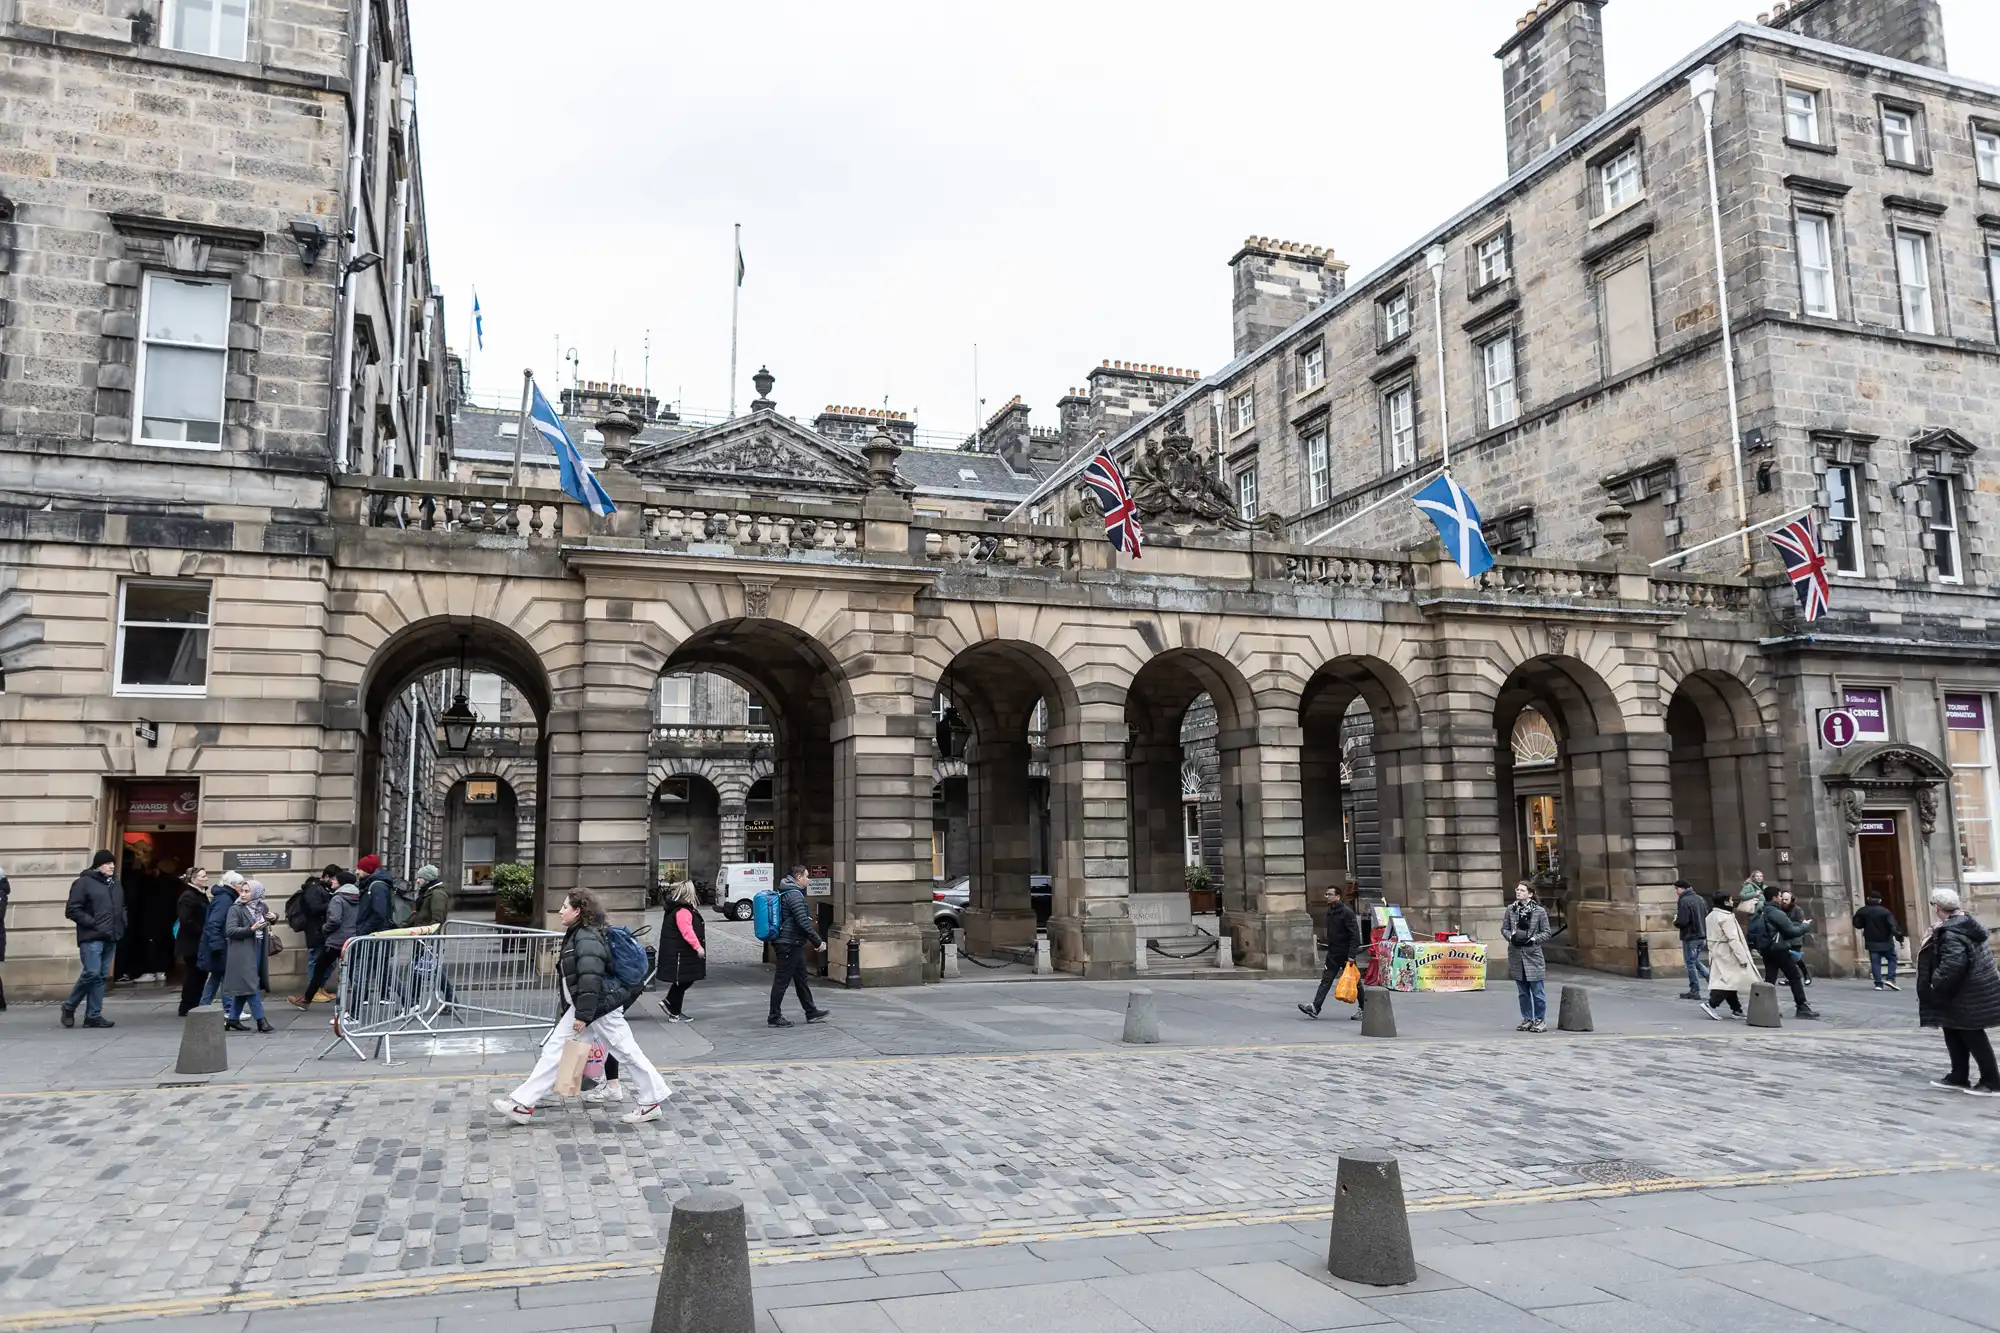 A historic stone building with archways. Several flags hang above, including Scottish and British flags. People walk by and stand in front, with some shopping bags and items visible.